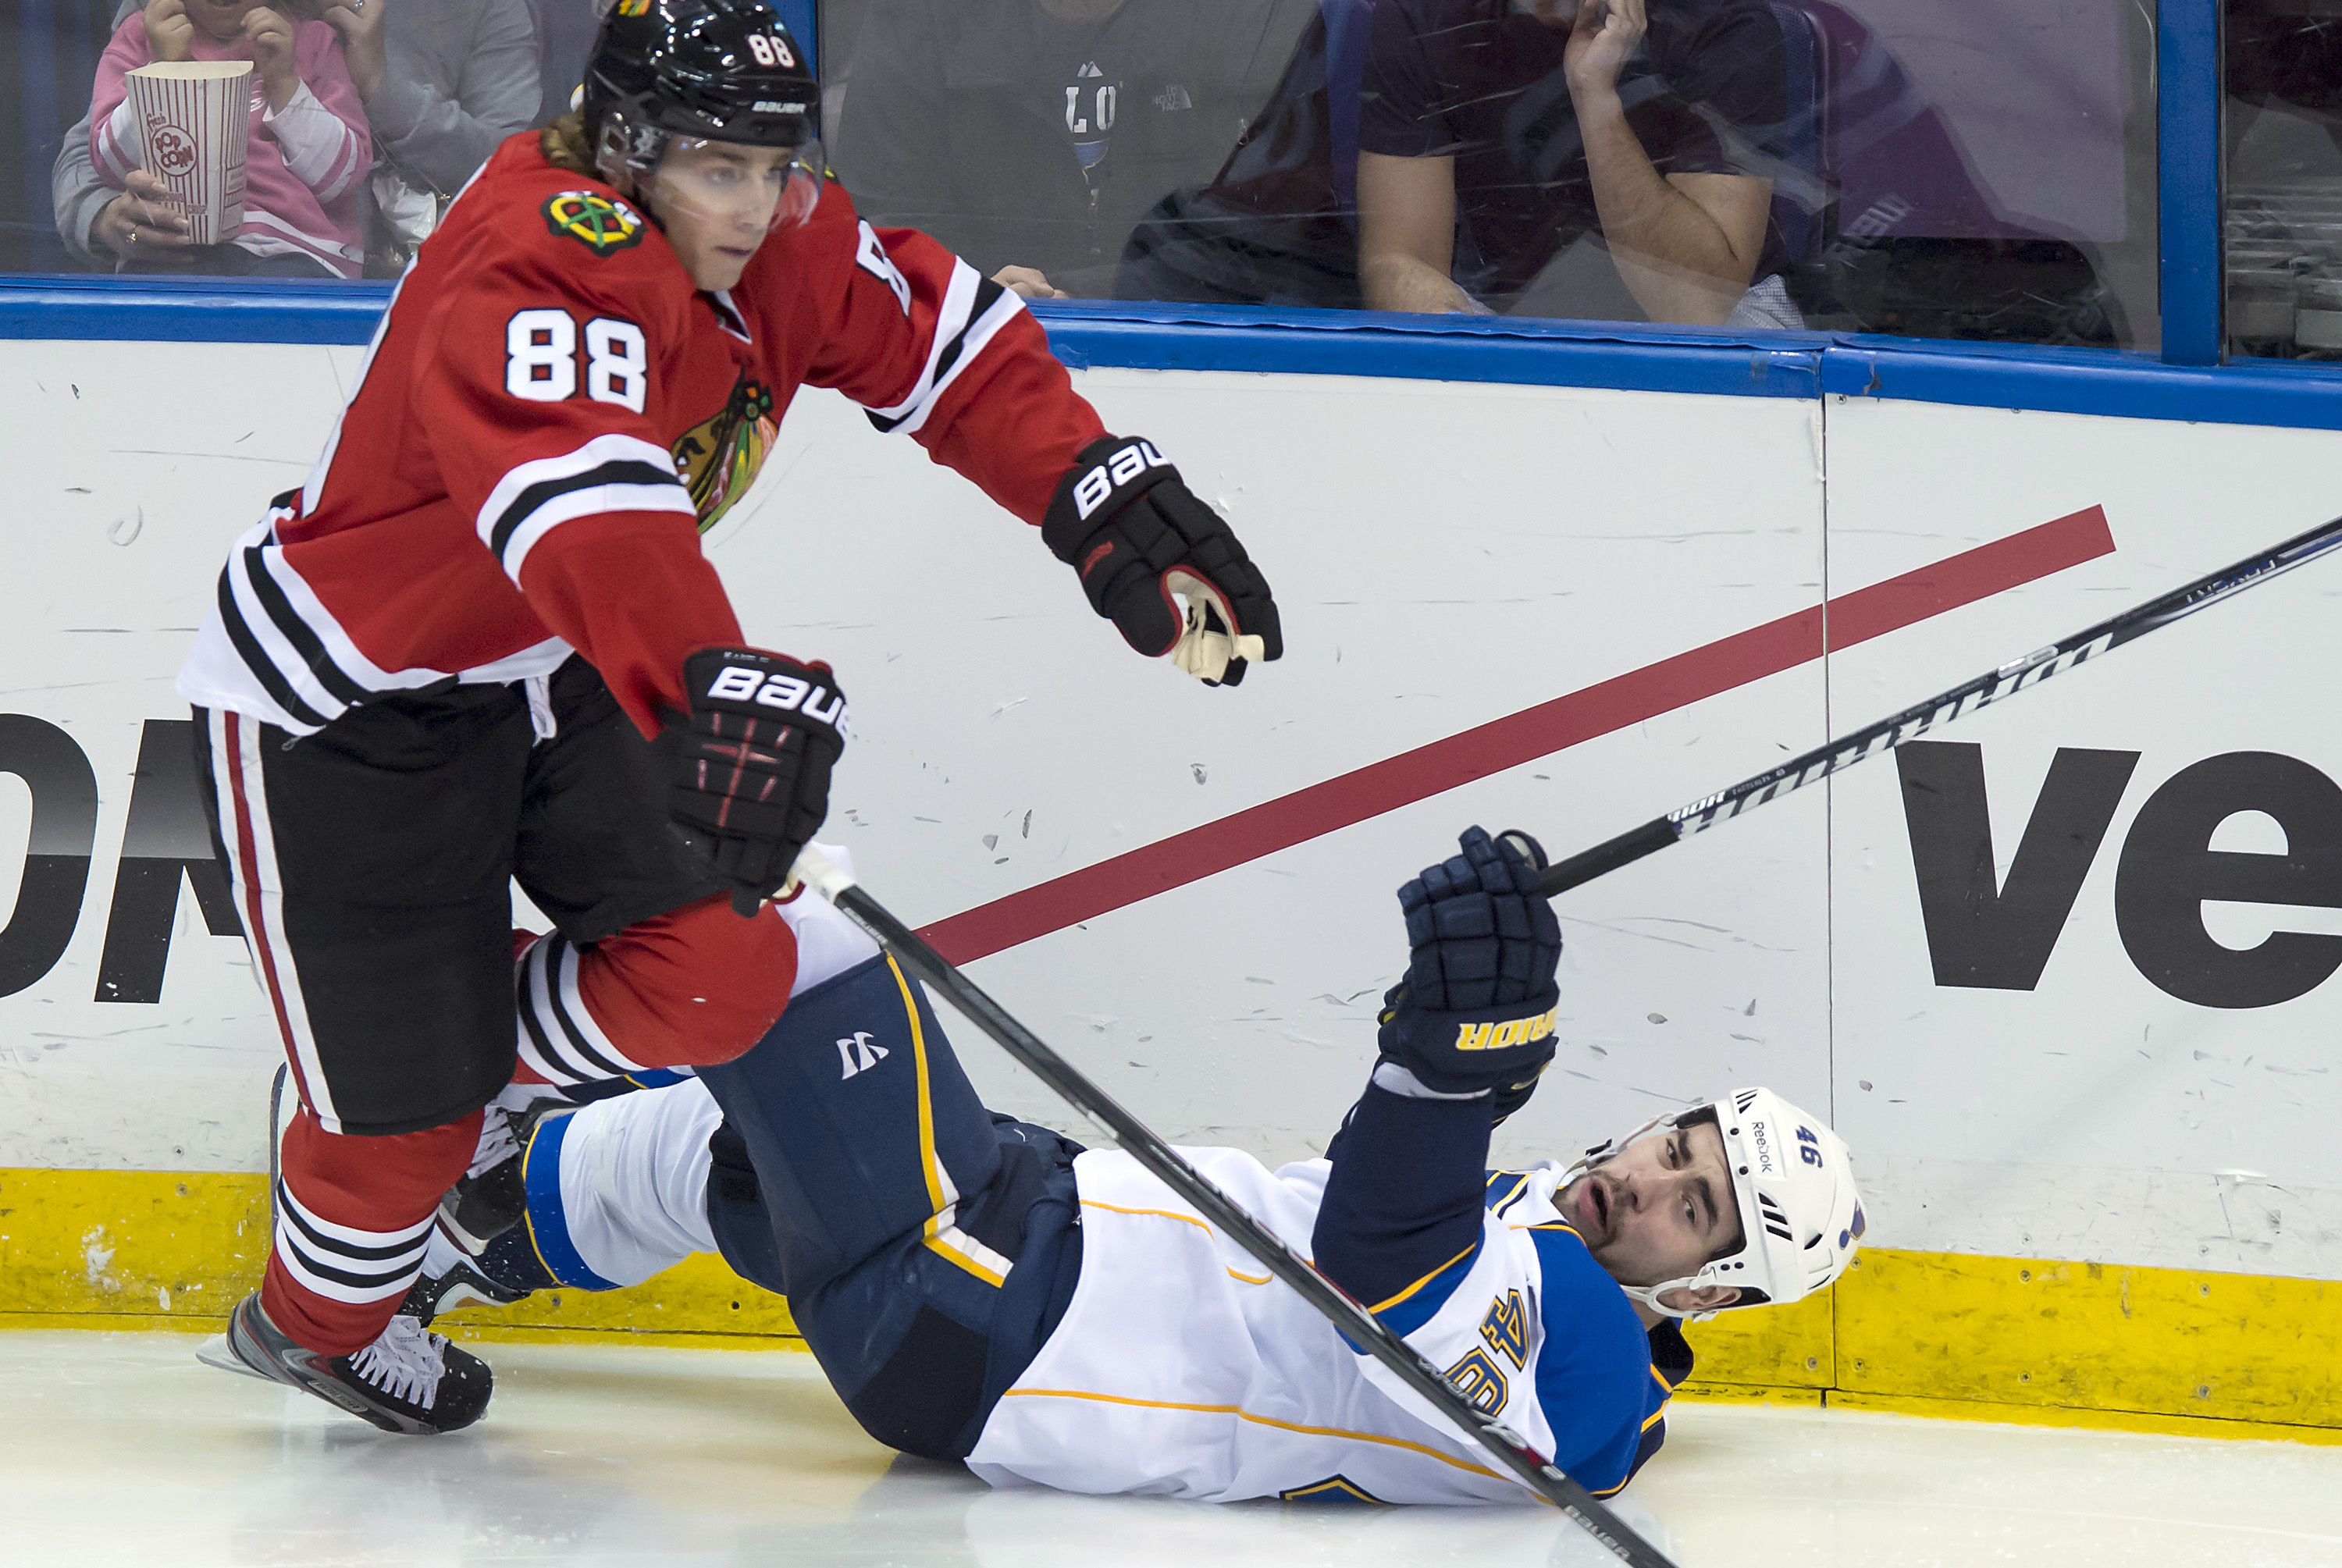 Gordo: Blues and Blackhawks have a classic rivalry